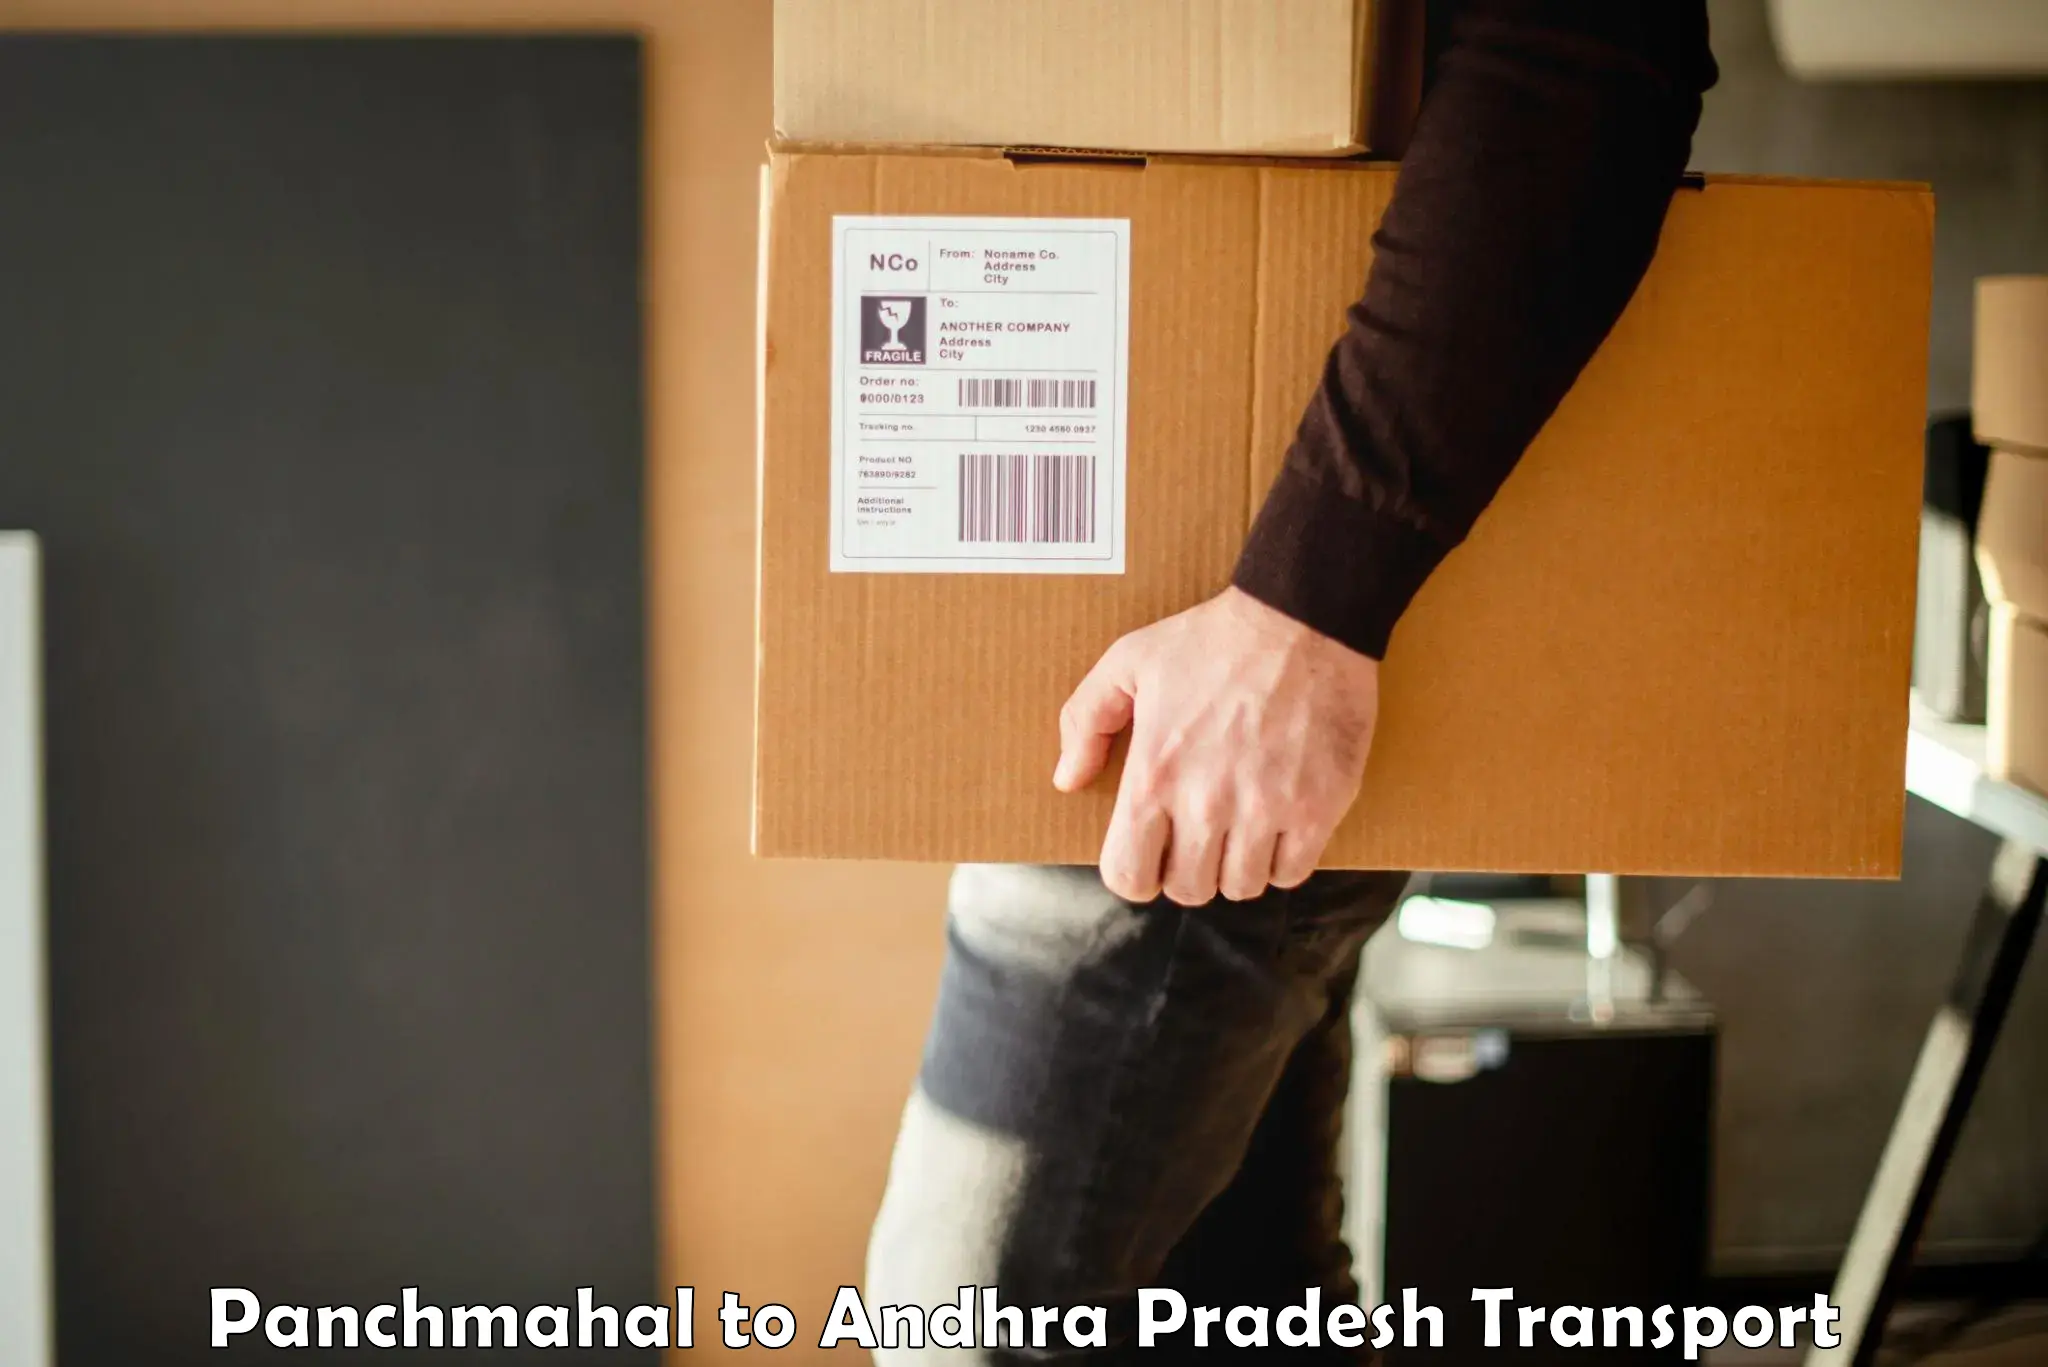 Delivery service Panchmahal to Guntakal